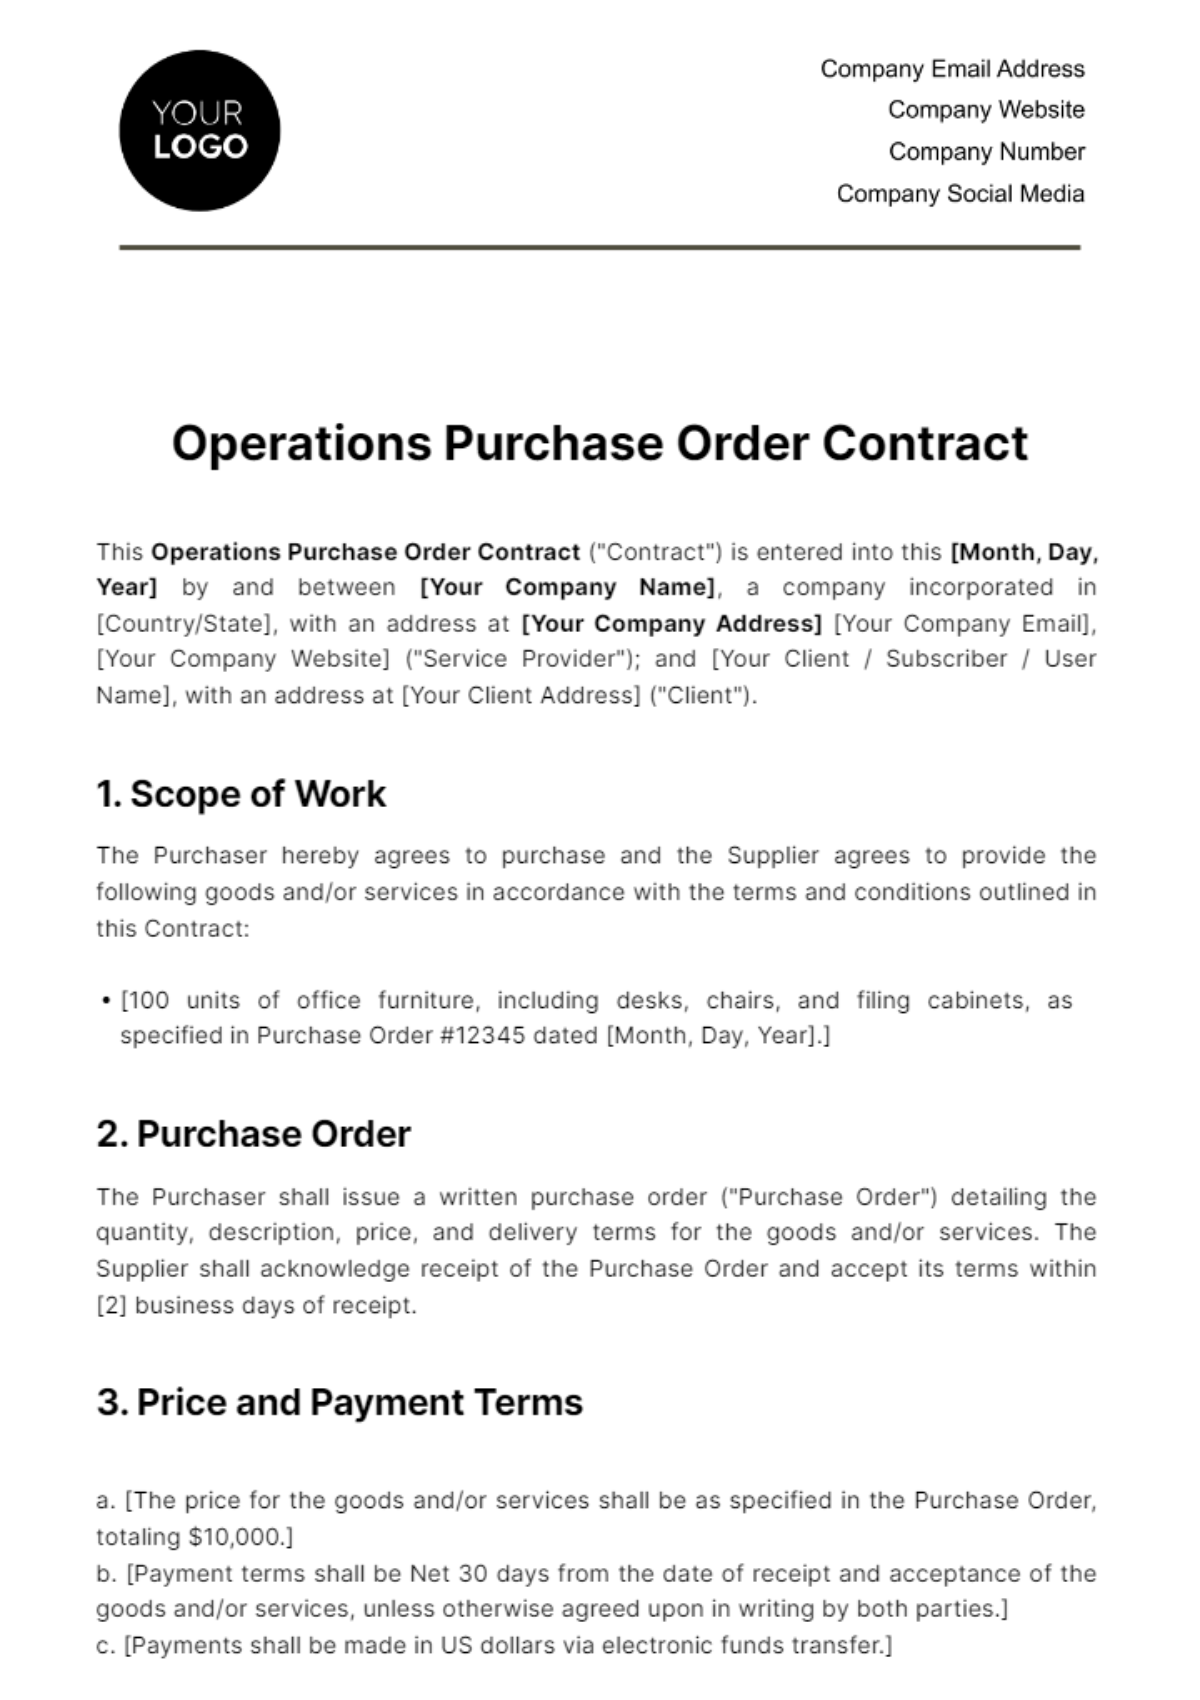 Operations Purchase Order Contract Template